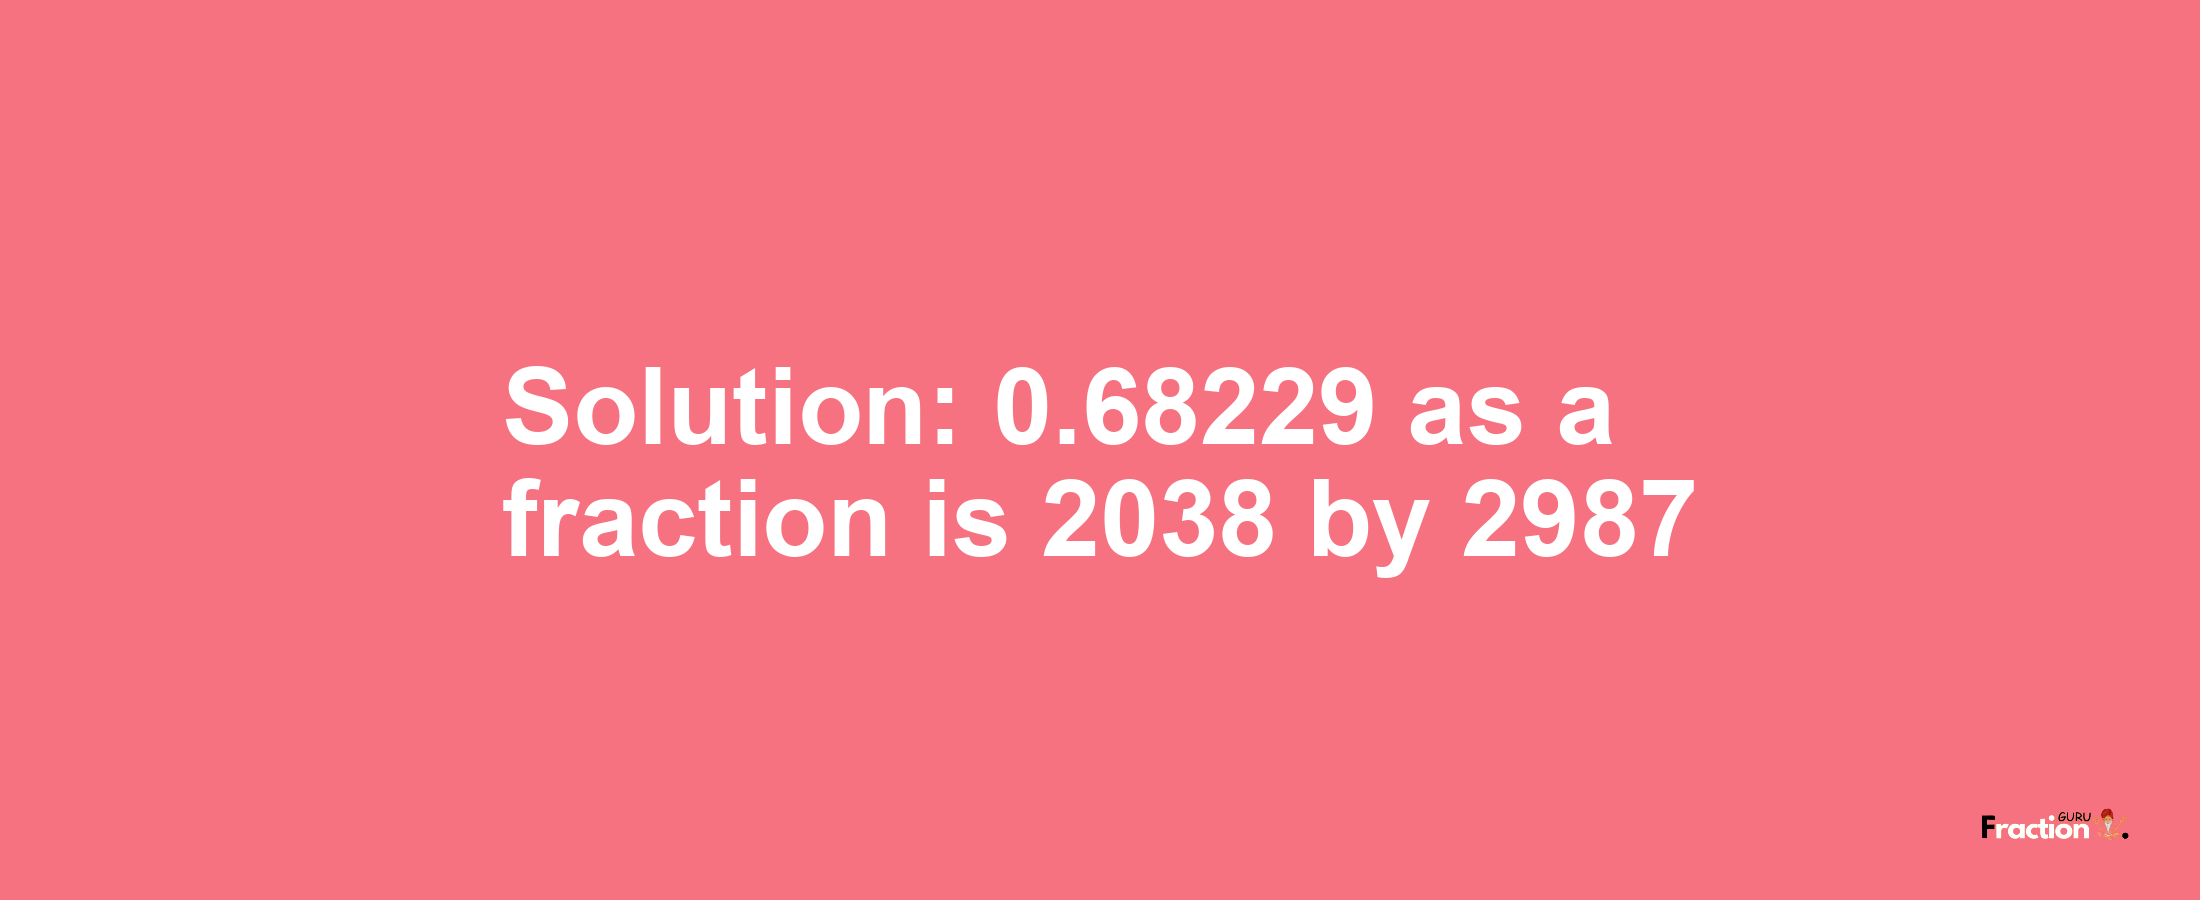 Solution:0.68229 as a fraction is 2038/2987